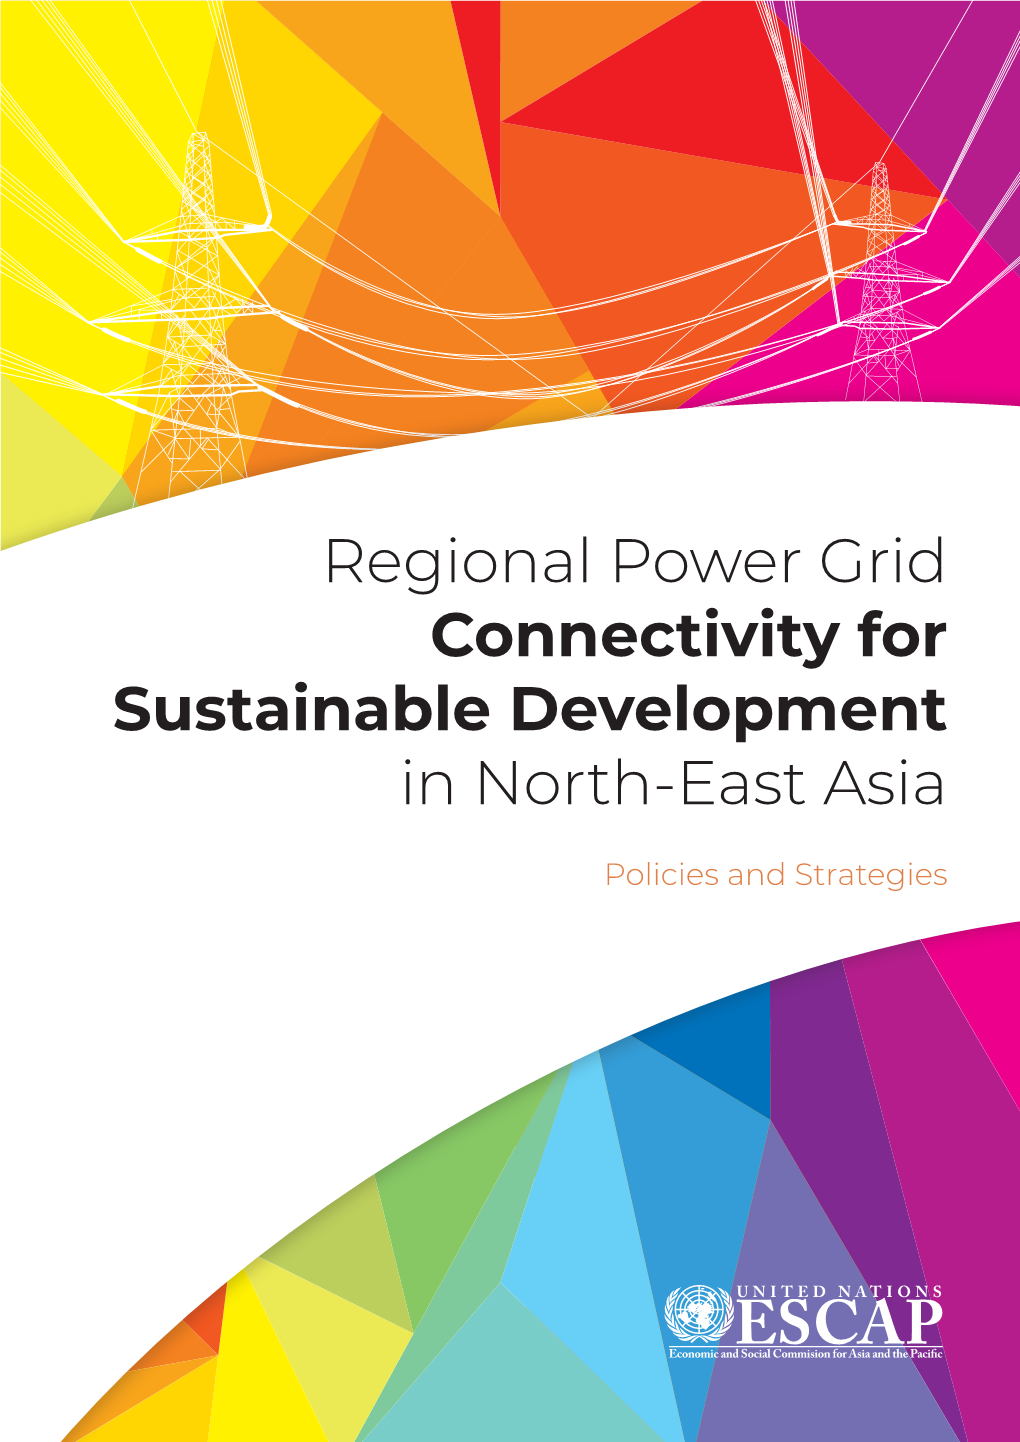 Regional Power Grid Connectivity for Sustainable Development in North-East Asia